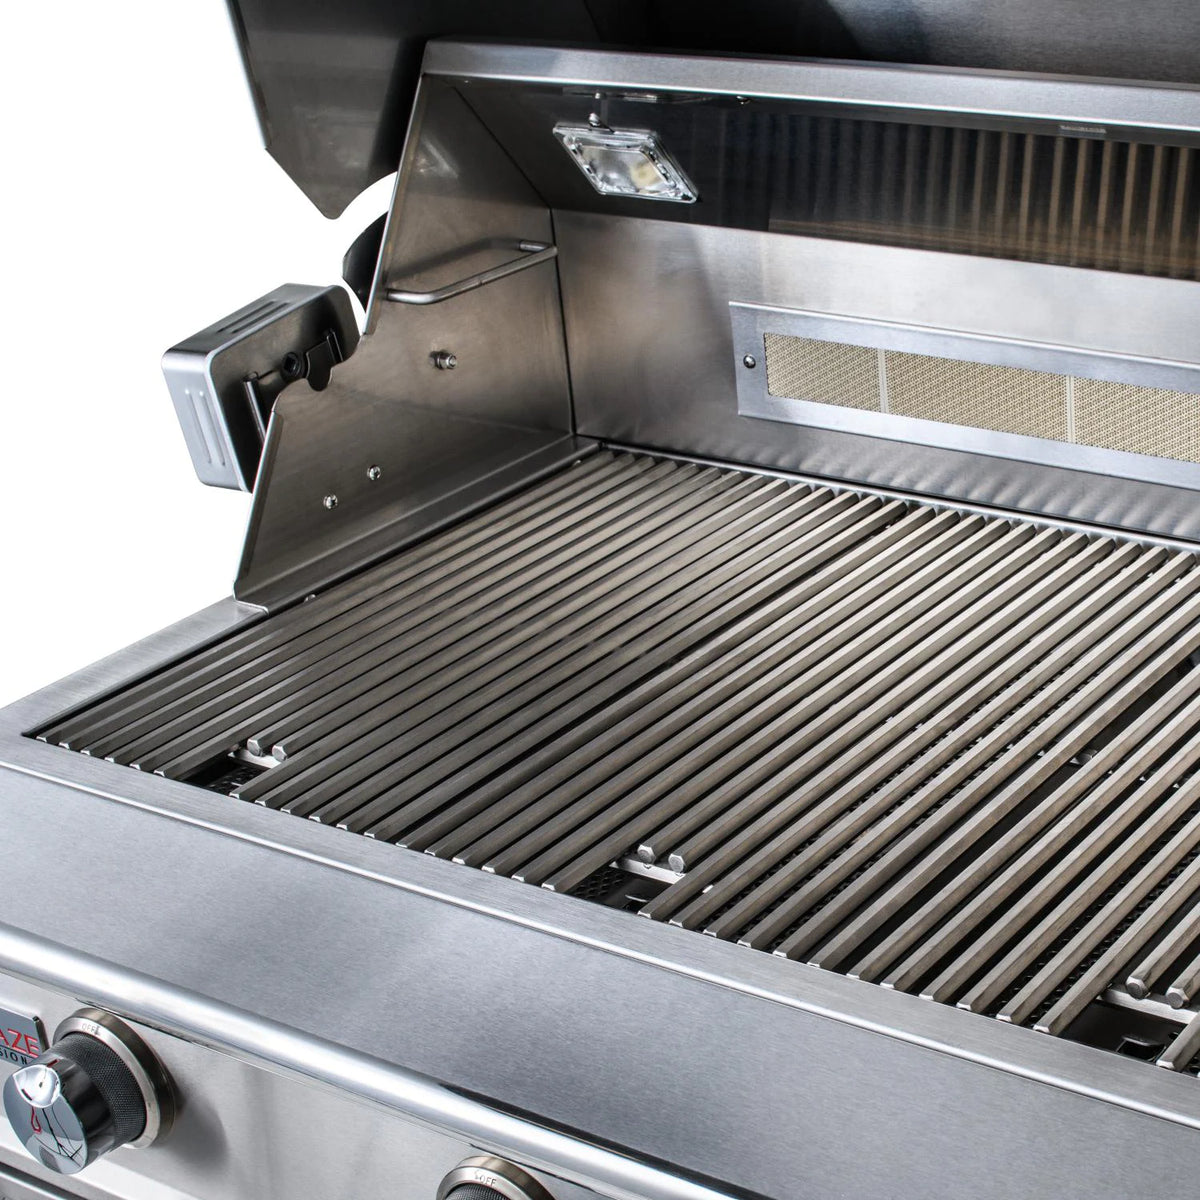 Blaze Professional 3 Burner 34 Inch Grill with Heavy-Duty 12mm Thick Hexagon Searing Rod